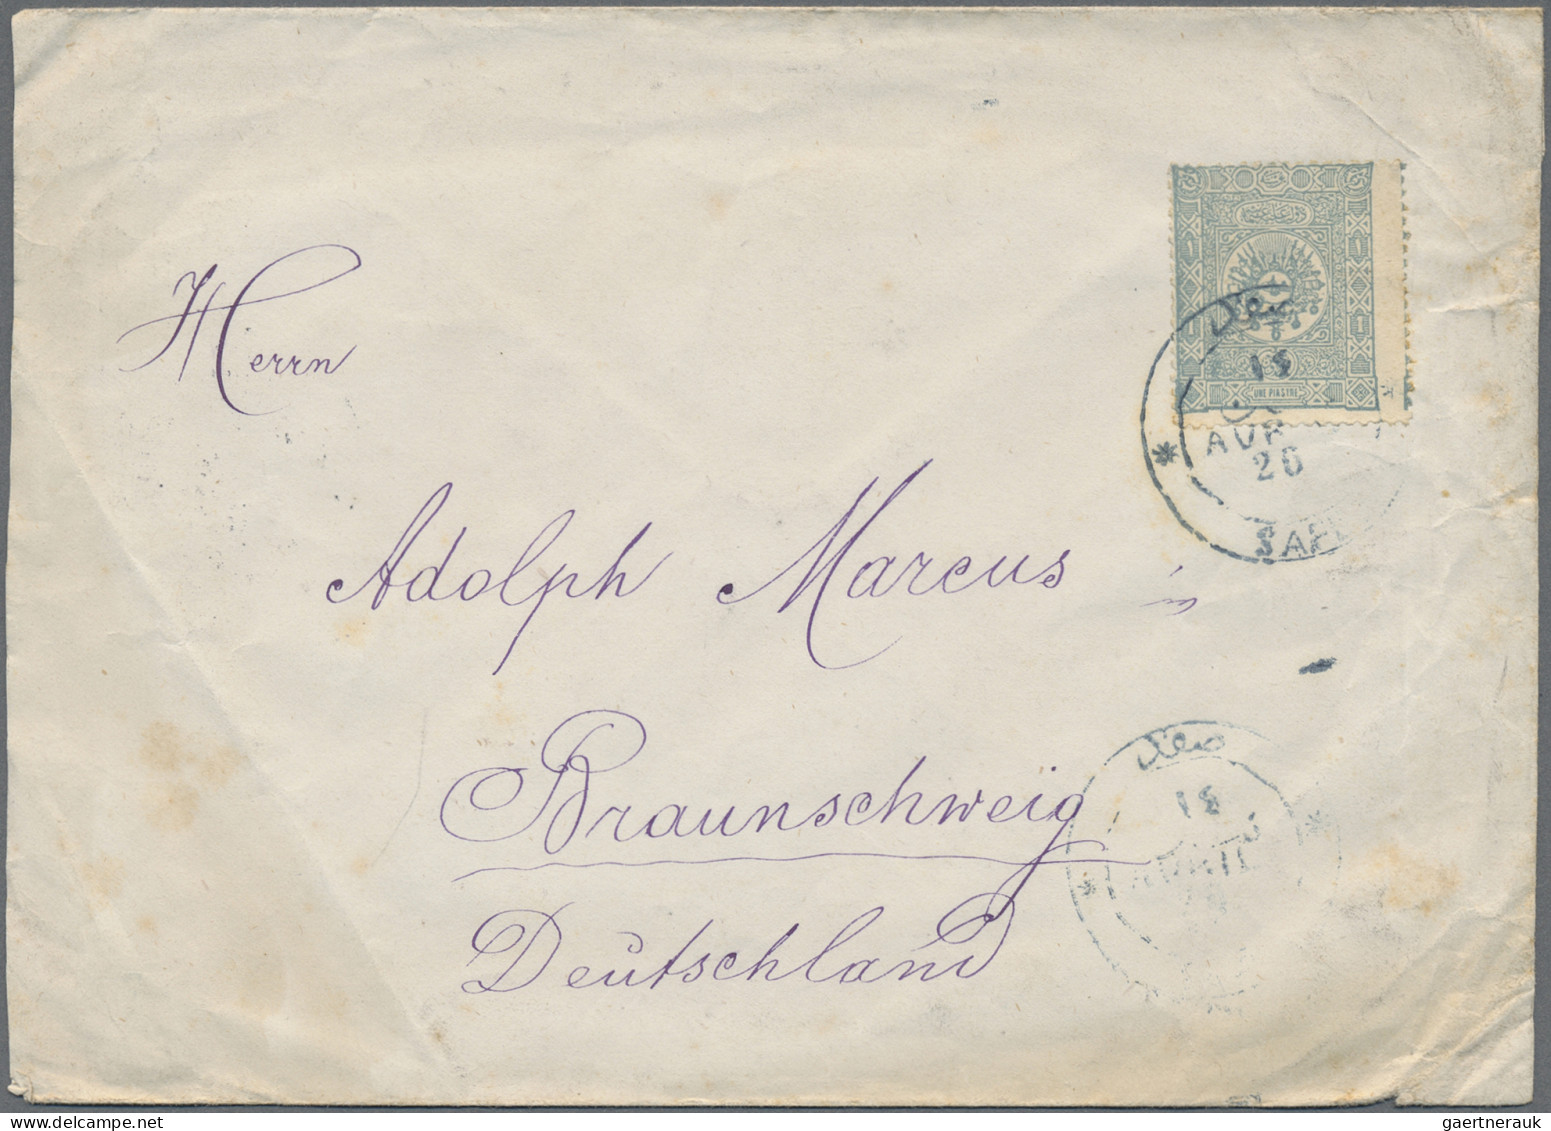 Holy Land: 1892/94 Two Covers From Safed To Braunschweig, Germany Cancelled By B - Palestina